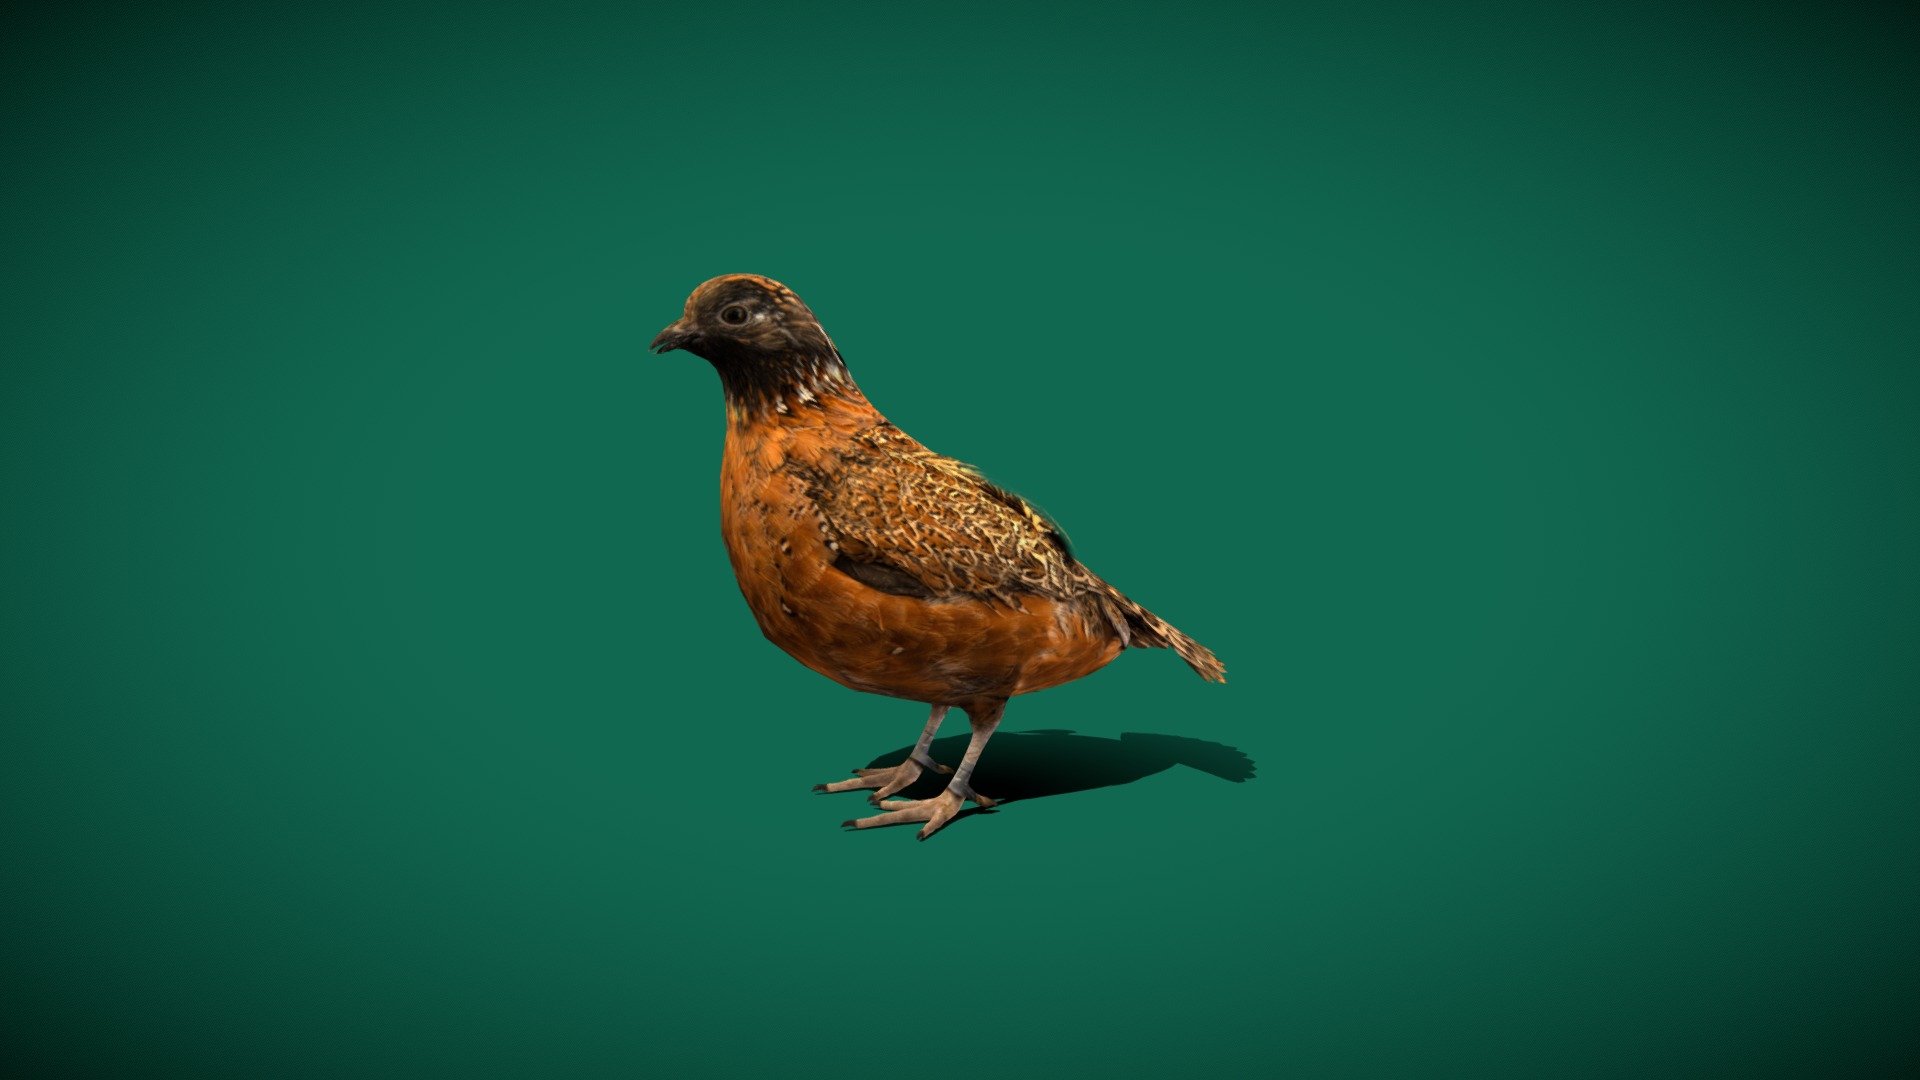 **Masked BobWhite Quails (federally_endangered )marked_quail

Colinus virginianus ridgwayi Animal Birds  (Bartlesville, Oklahoma)

1 Draw Calls

LowPoly

GameReady

8 Animations

4K PBR Textures Material

Unreal FBX (Unreal 4,5 Plus)

Unity FBX  

Blend File 

USDZ File (AR Ready). Real Scale Dimension

Textures Files

GLB File (Unreal 5.1  Plus Native Support)

Gltf File ( Spark AR, Lens Studio(SnapChat) , Effector(Tiktok) , Spline, Play Canvas ) Compatible**

Triangles : 8978

Vertices  : 5168

Faces     : 5636

Edges     : 10788
Diffuse, Metallic, Roughness , Normal Map ,Specular Map,AO,
A male federally endangered masked bobwhite quail (Colinus virginianus ridgwayi) at the Sutton Avian Research Center near Bartlesville, Oklahoma.
.
 - Masked BobWhite Quail Bird (Endangered) - Buy Royalty Free 3D model by Nyilonelycompany 3d model